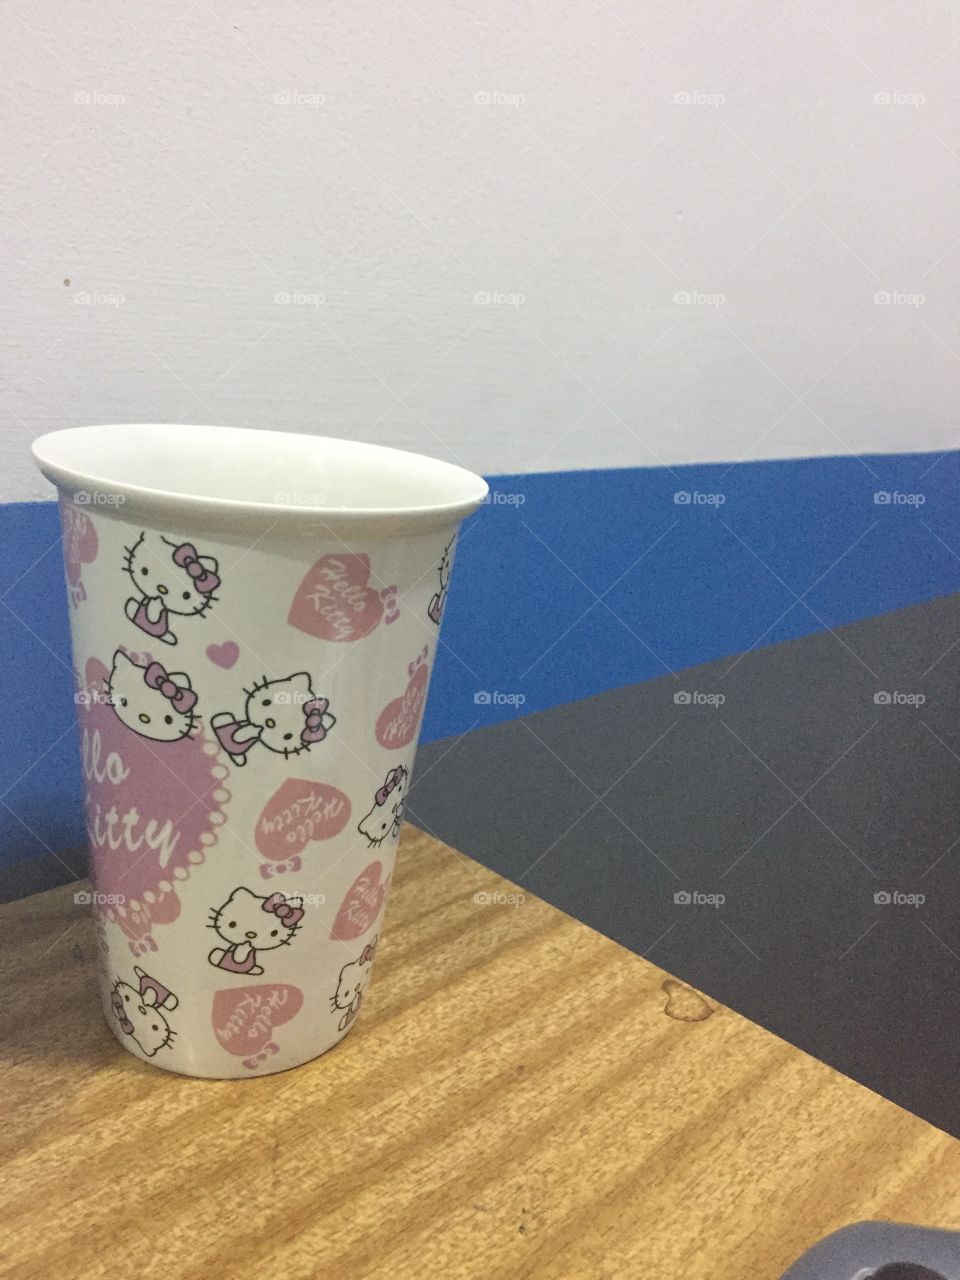 My every day cup 